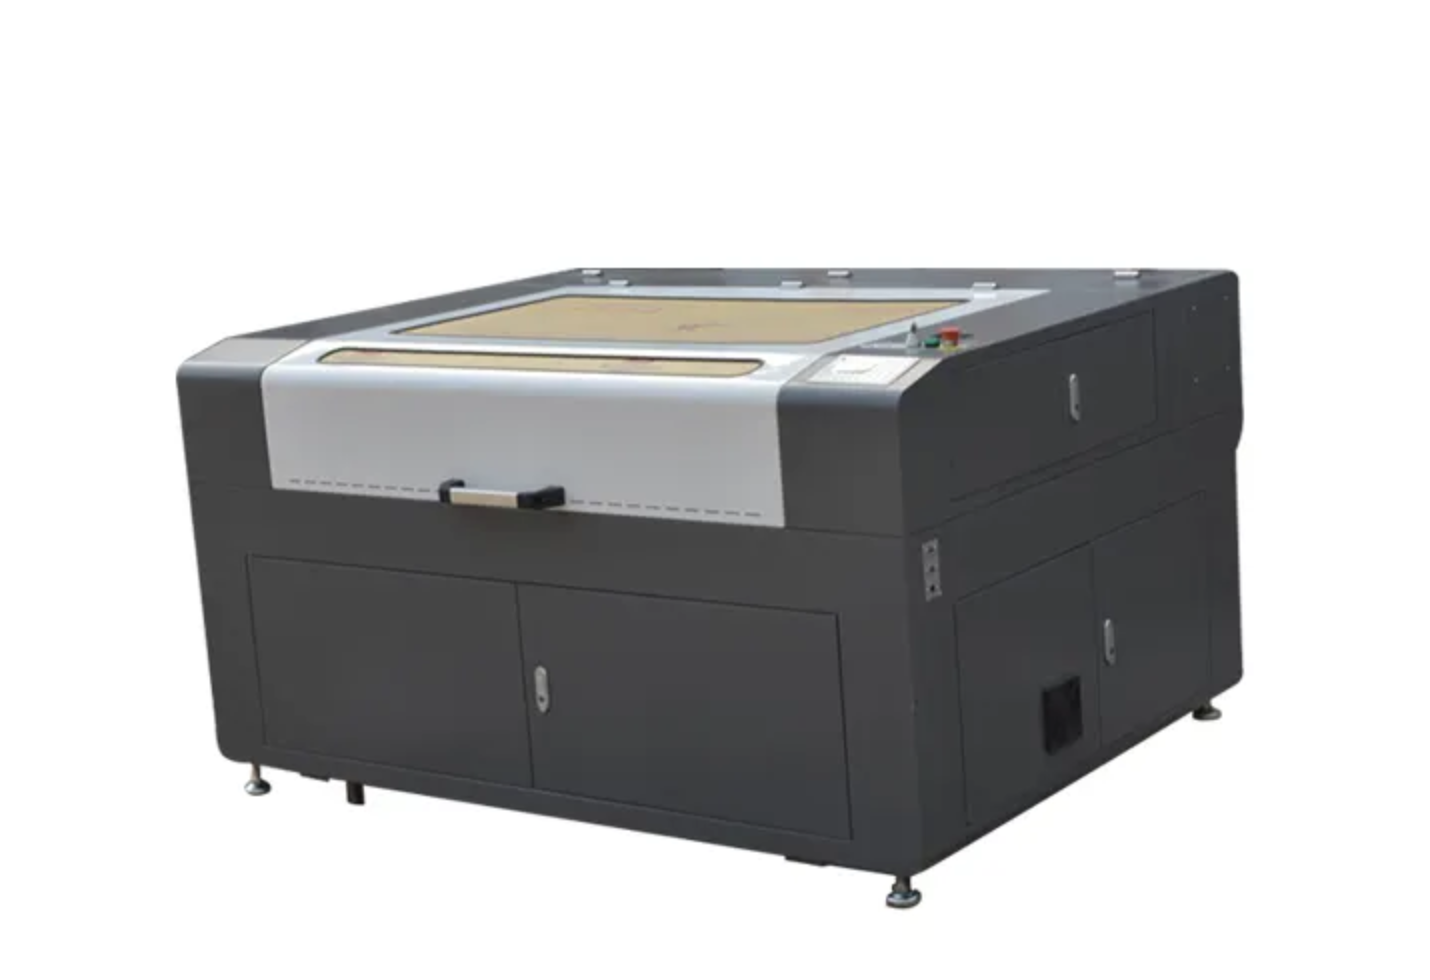 What are the advantages of laser cutting machine?